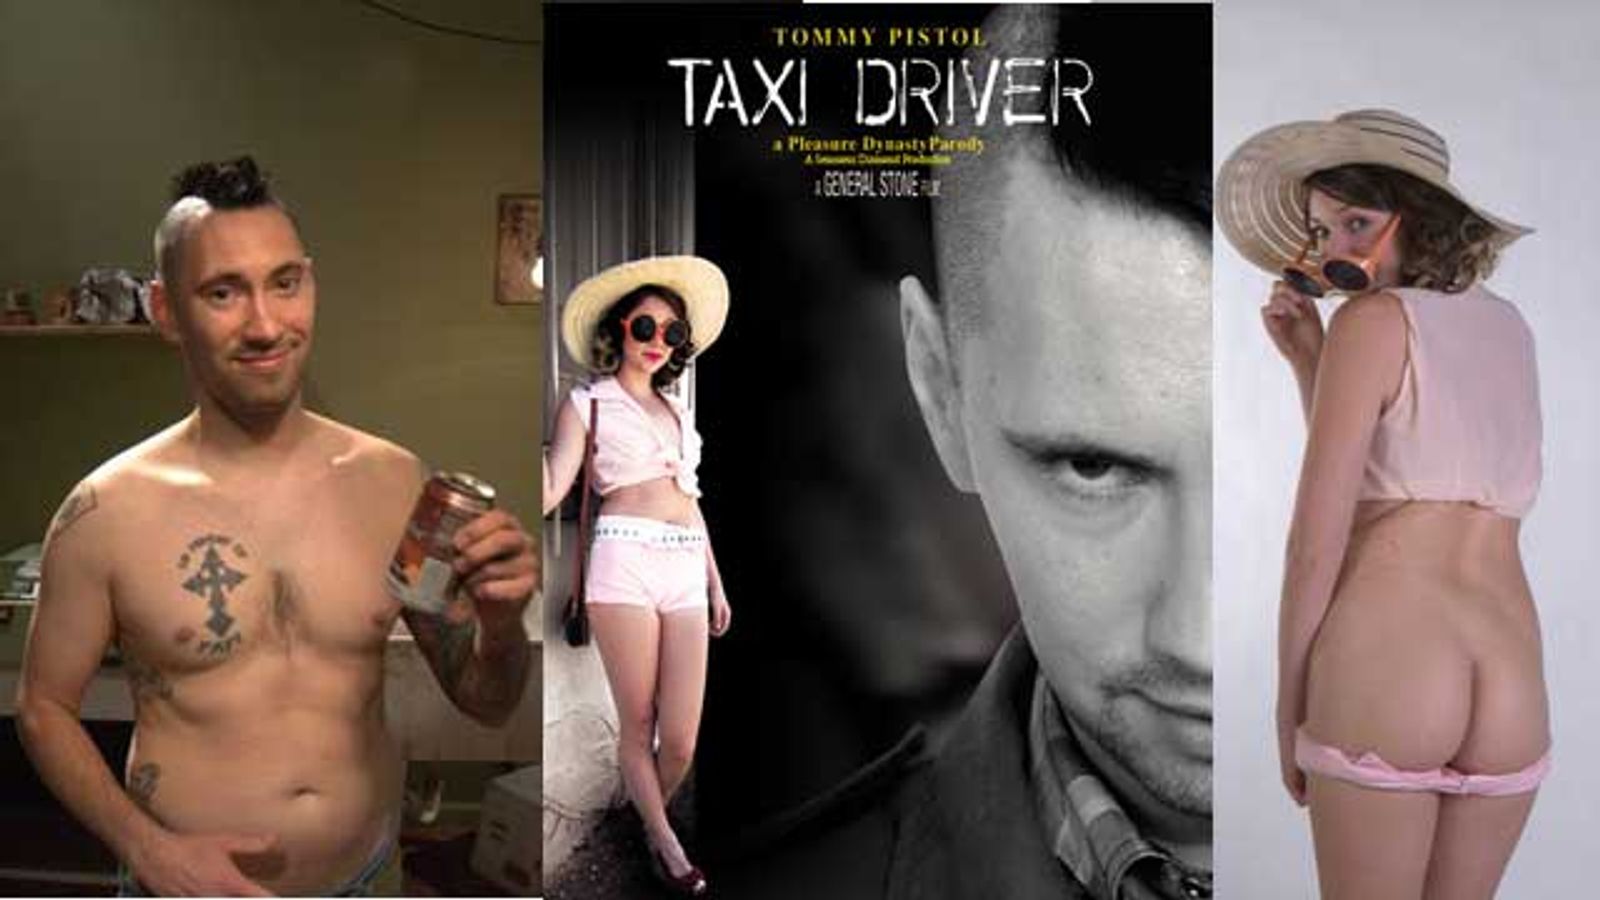 Rave Reviews for 'Taxi Driver: A XXX Parody' Boost Holiday Sales